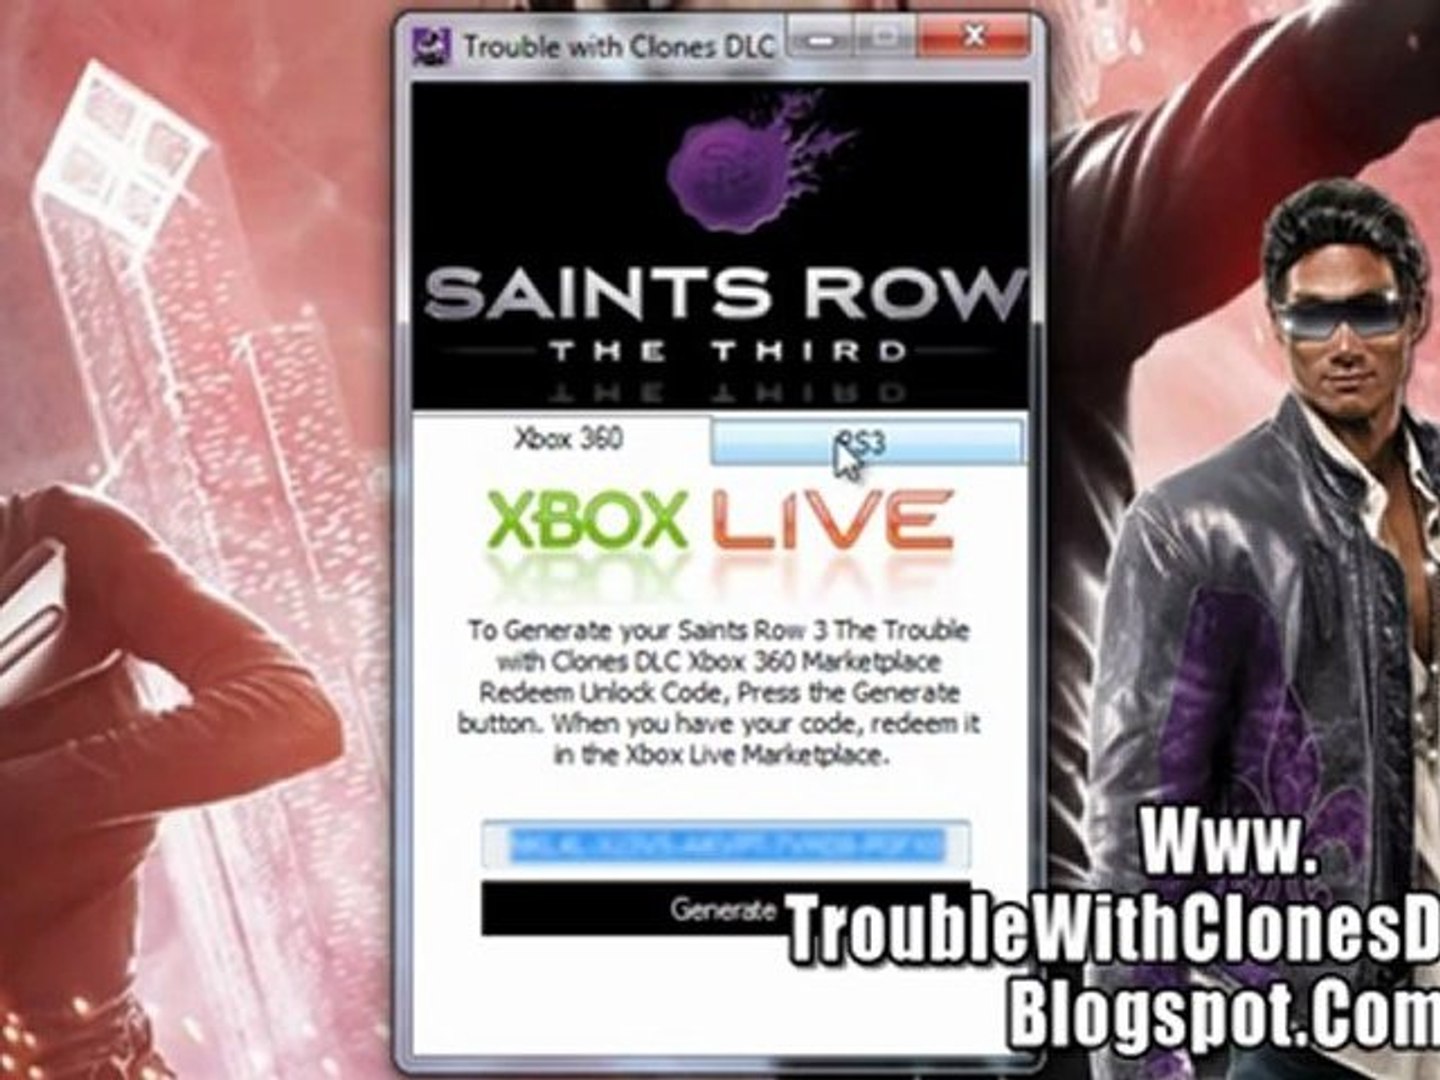 How to Get Saints Row 3 The Trouble with Clones DLC Free - video Dailymotion